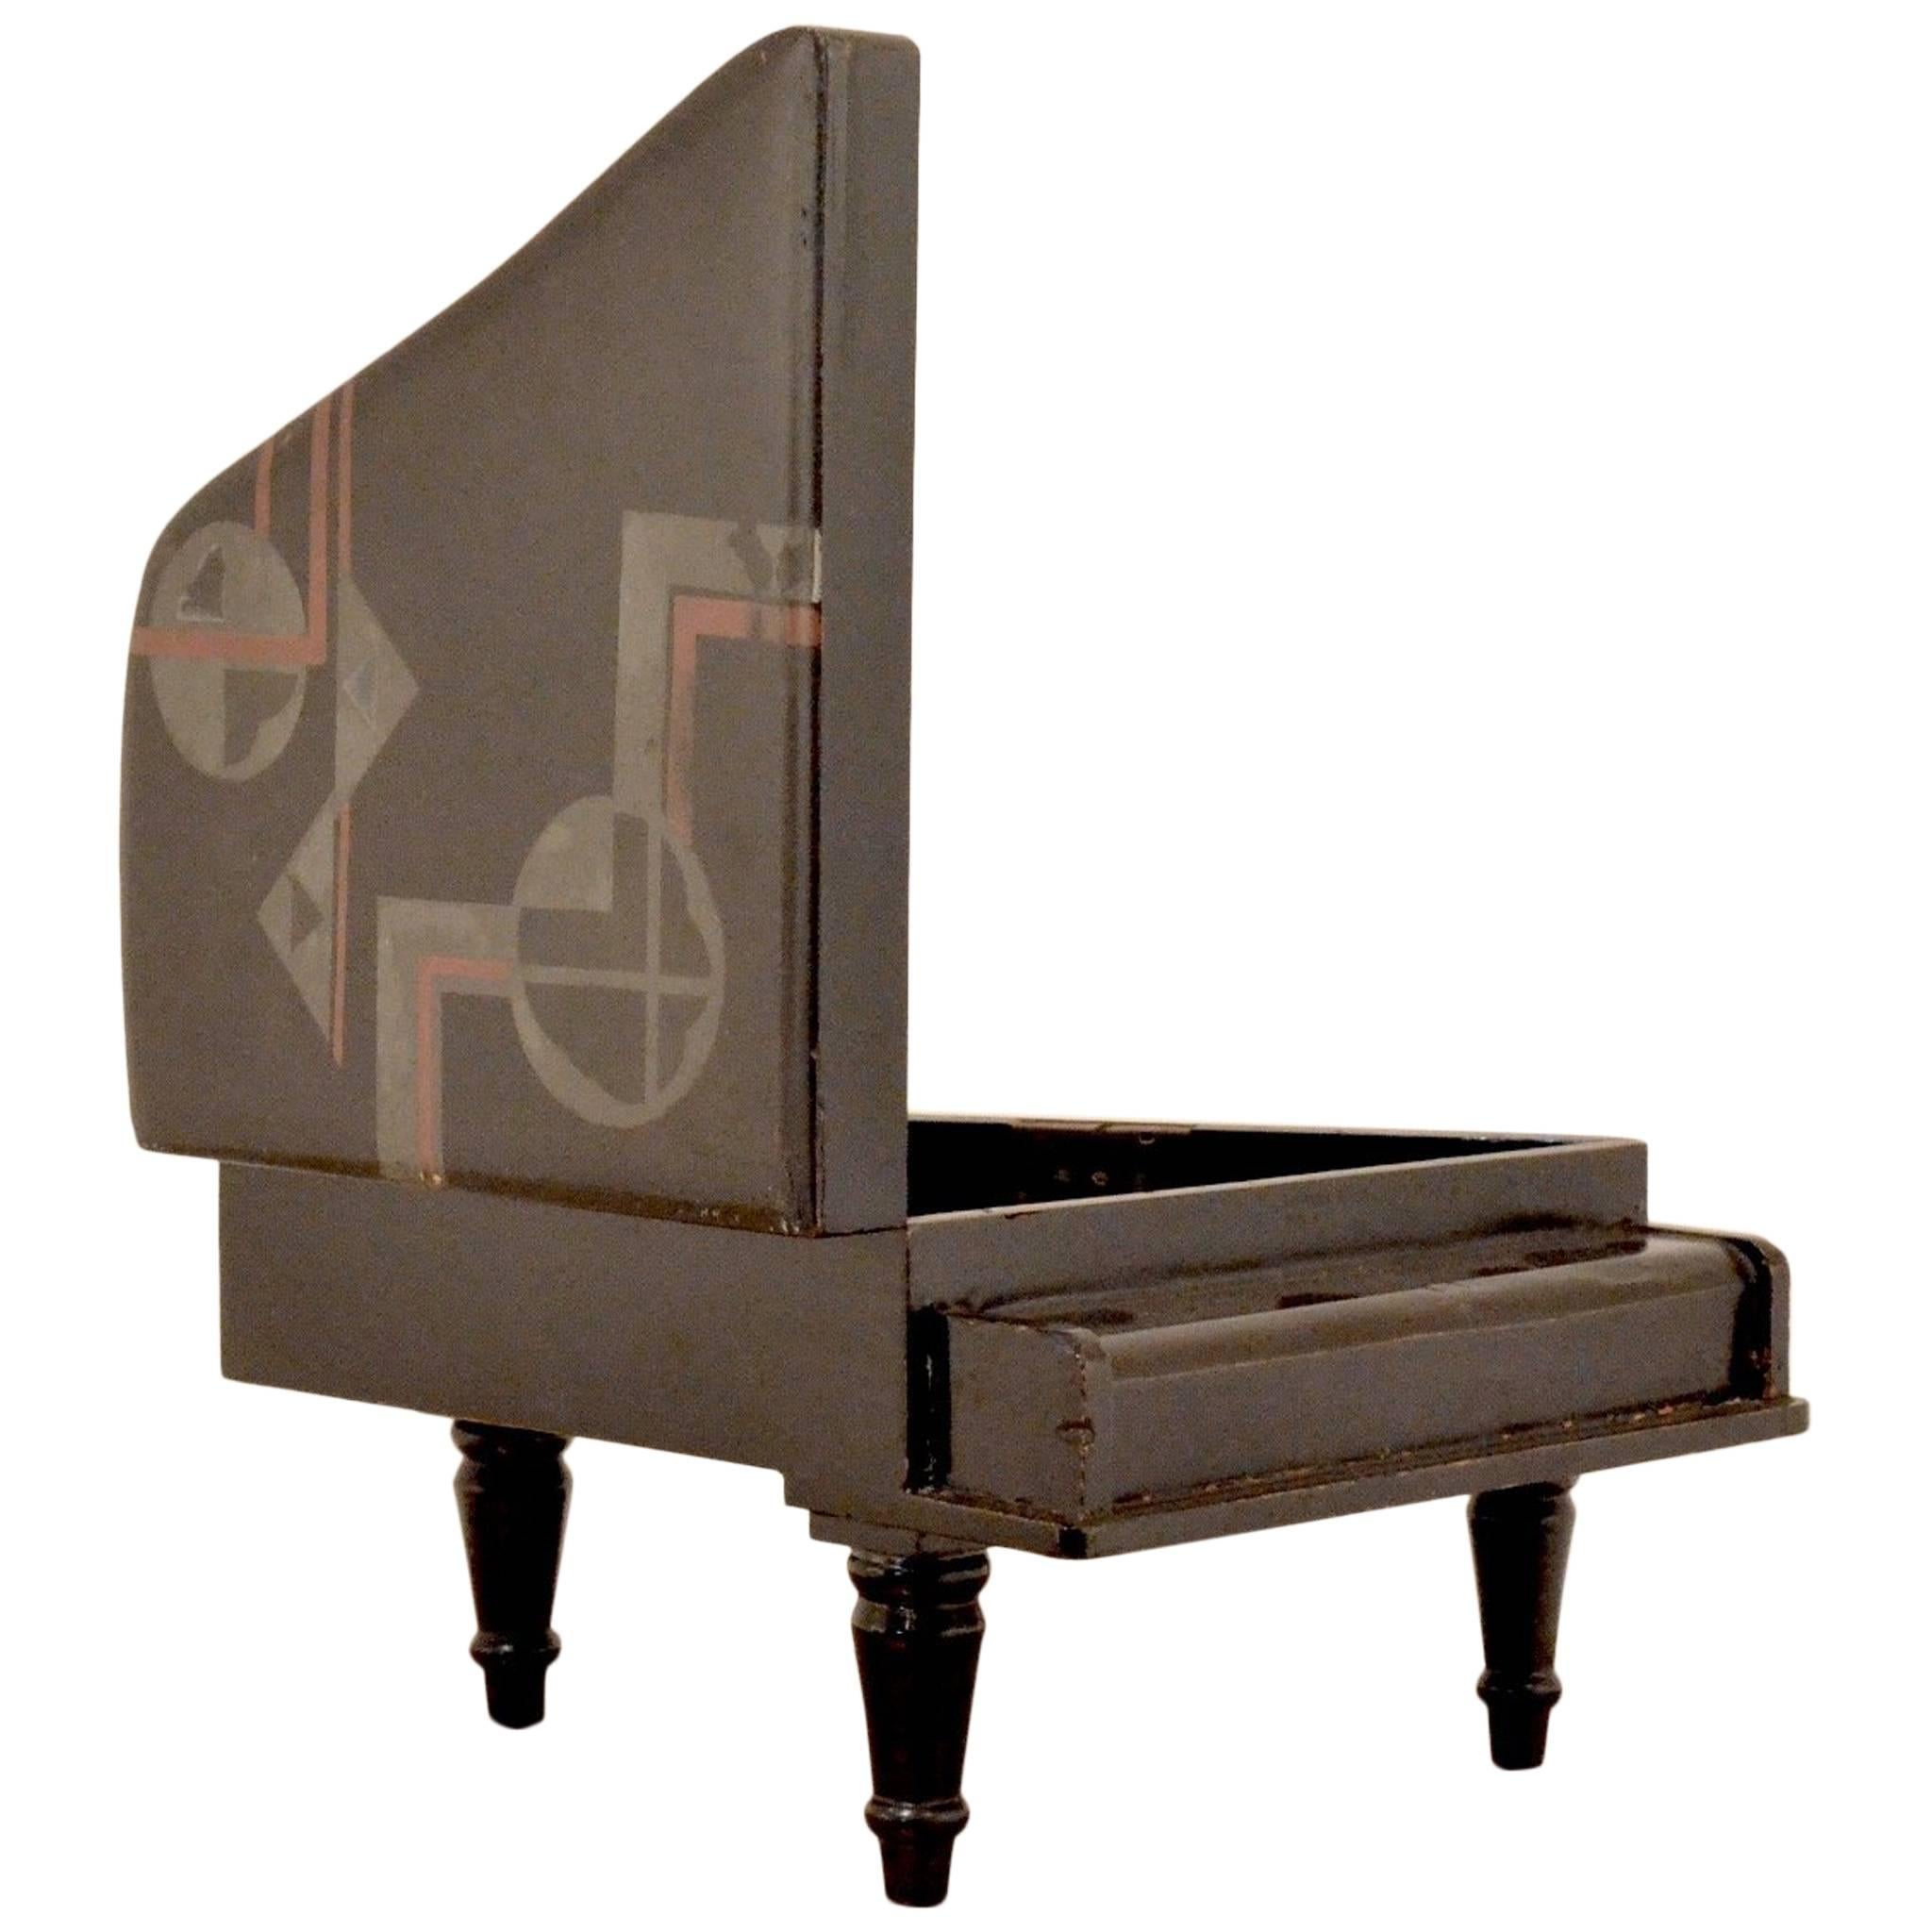 1920s Art Deco Black Lacquered Wooden Piano Shaped Jewelry Box For Sale